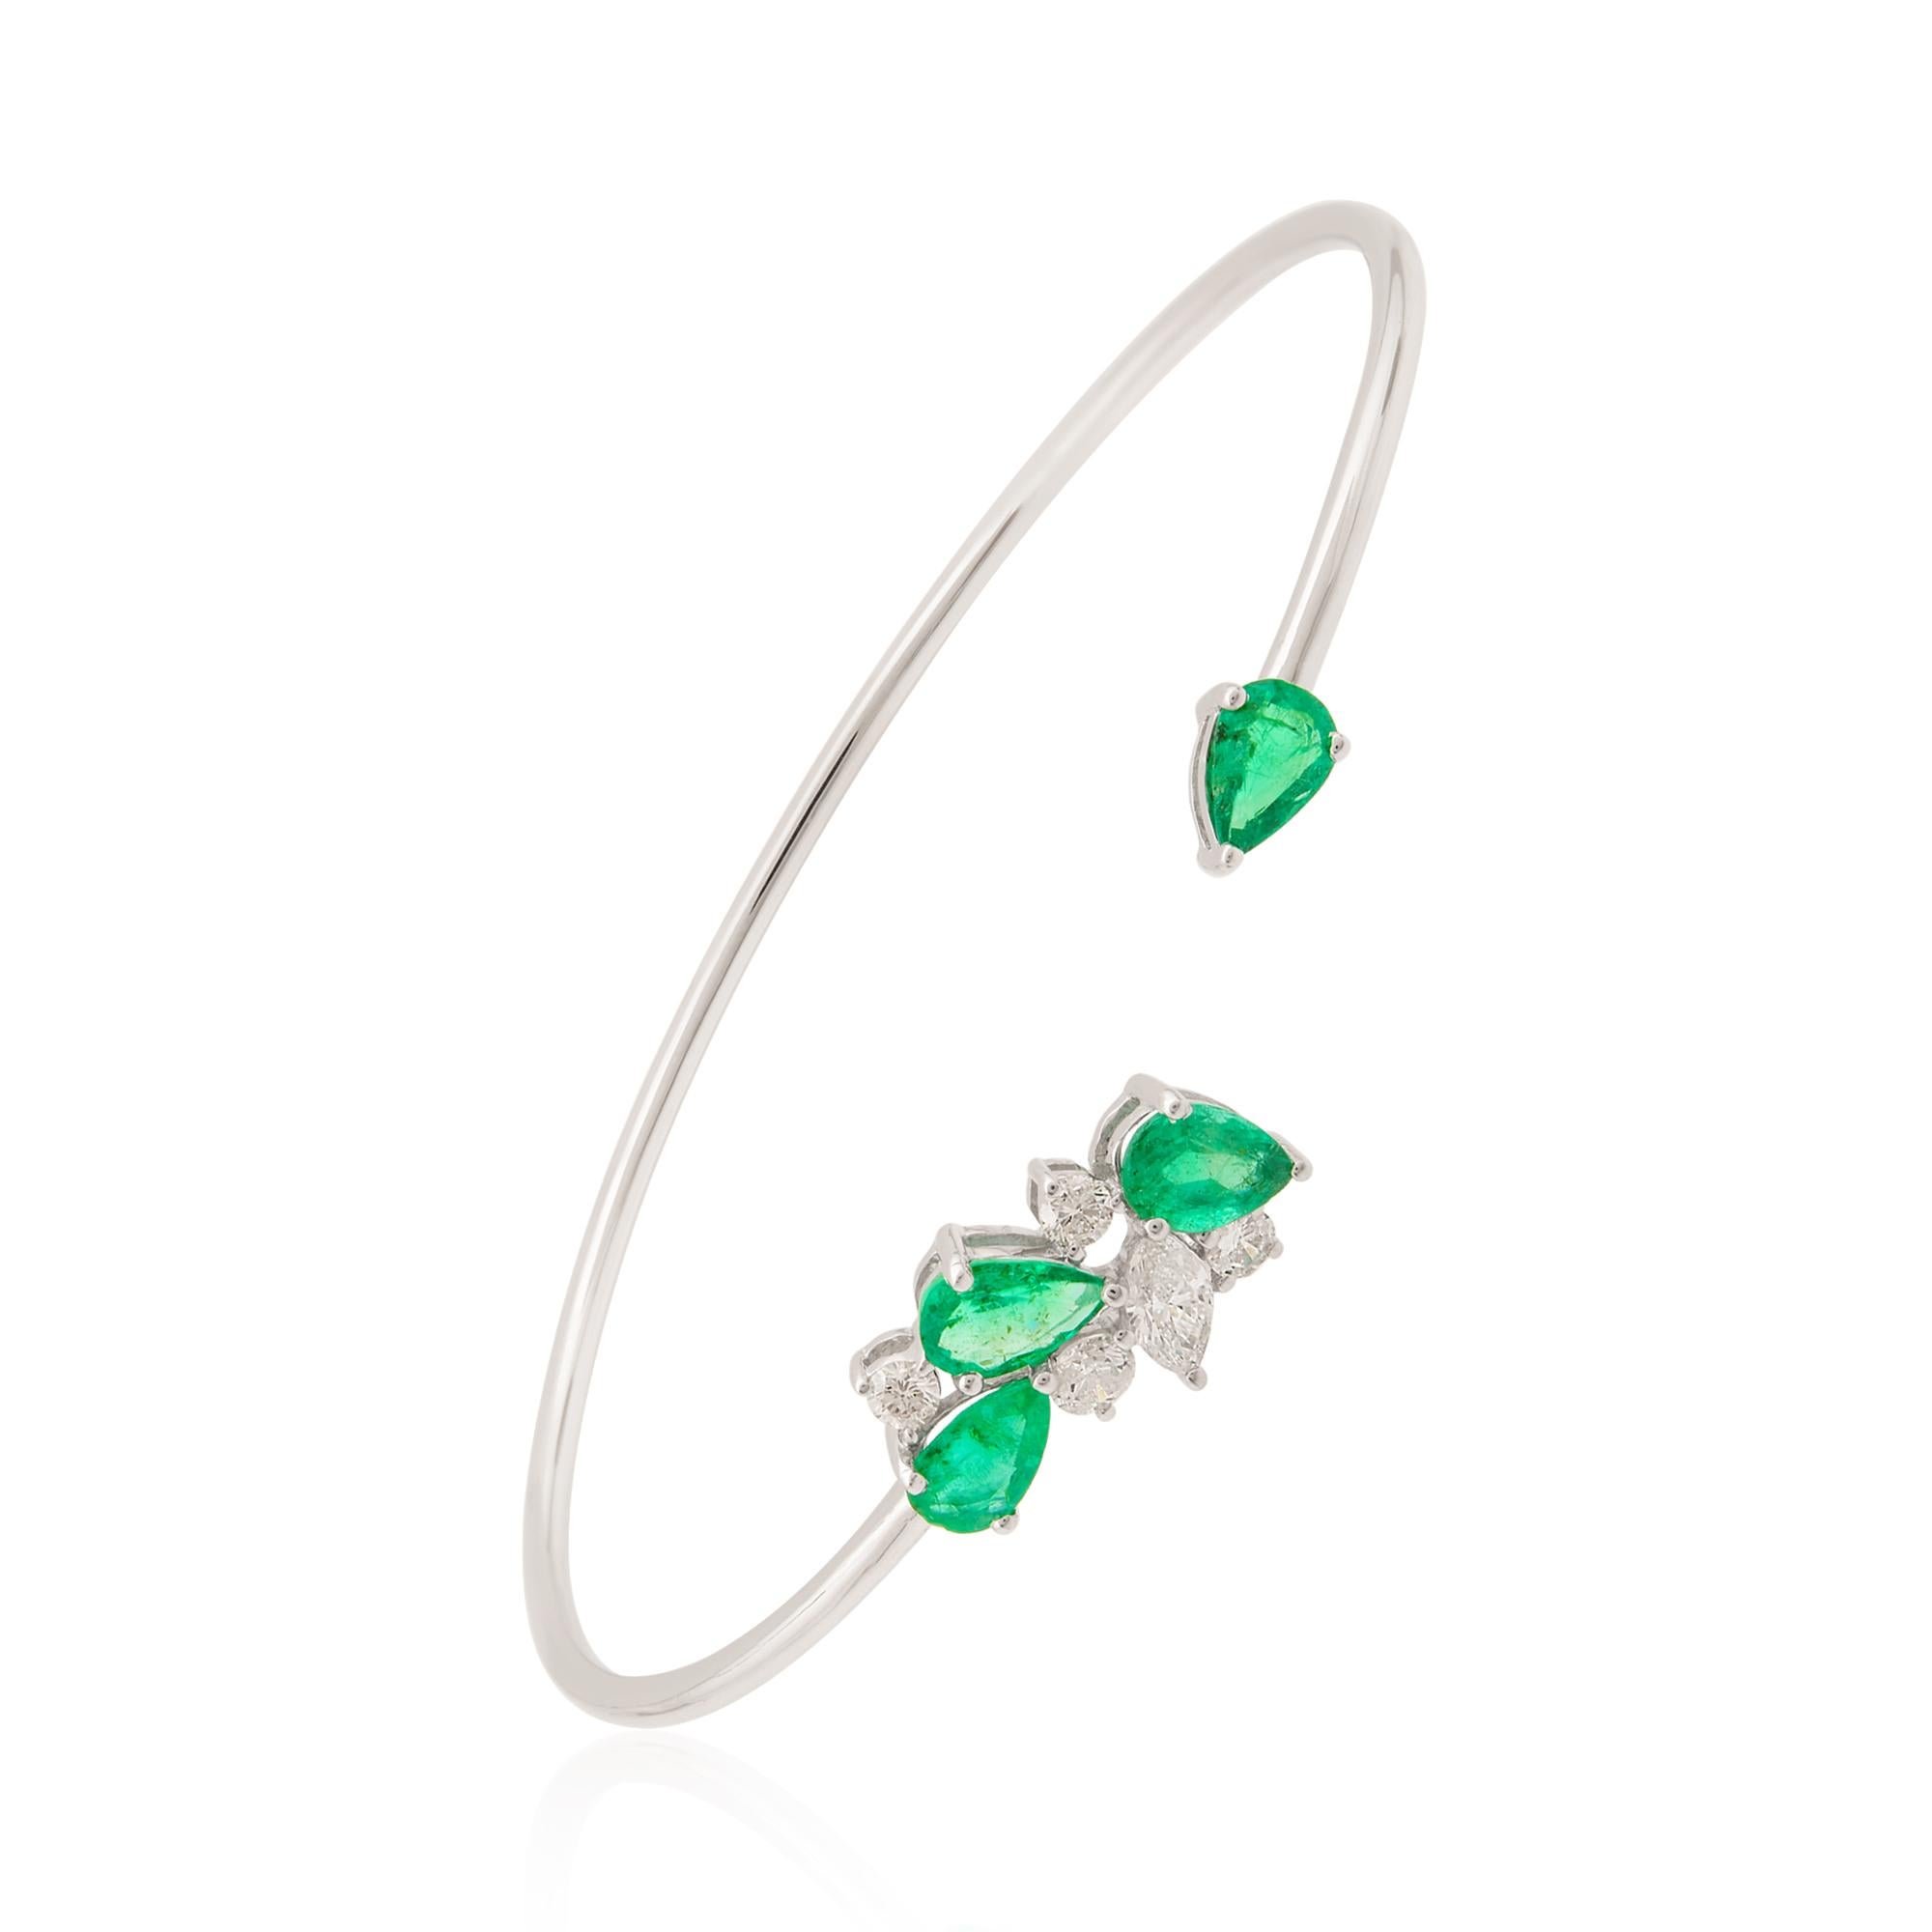 At the heart of this cuff bangle bracelet is a stunning pear-shaped natural emerald gemstone. The emerald displays its mesmerizing green hue, known for its rich and vibrant color that is synonymous with elegance and beauty. The pear shape adds a